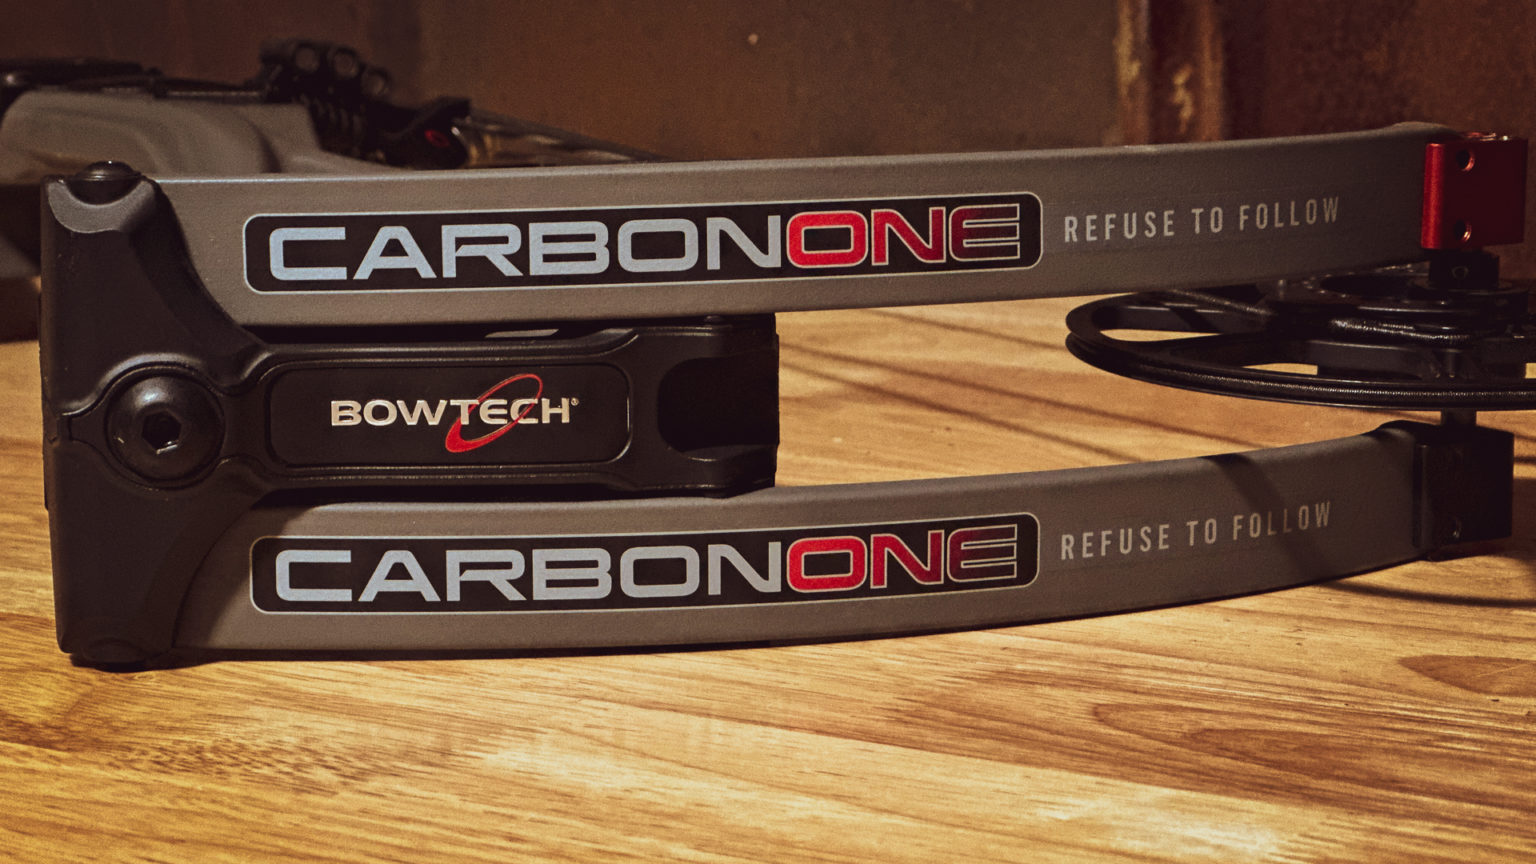 Bowtech Carbon One Bow Review